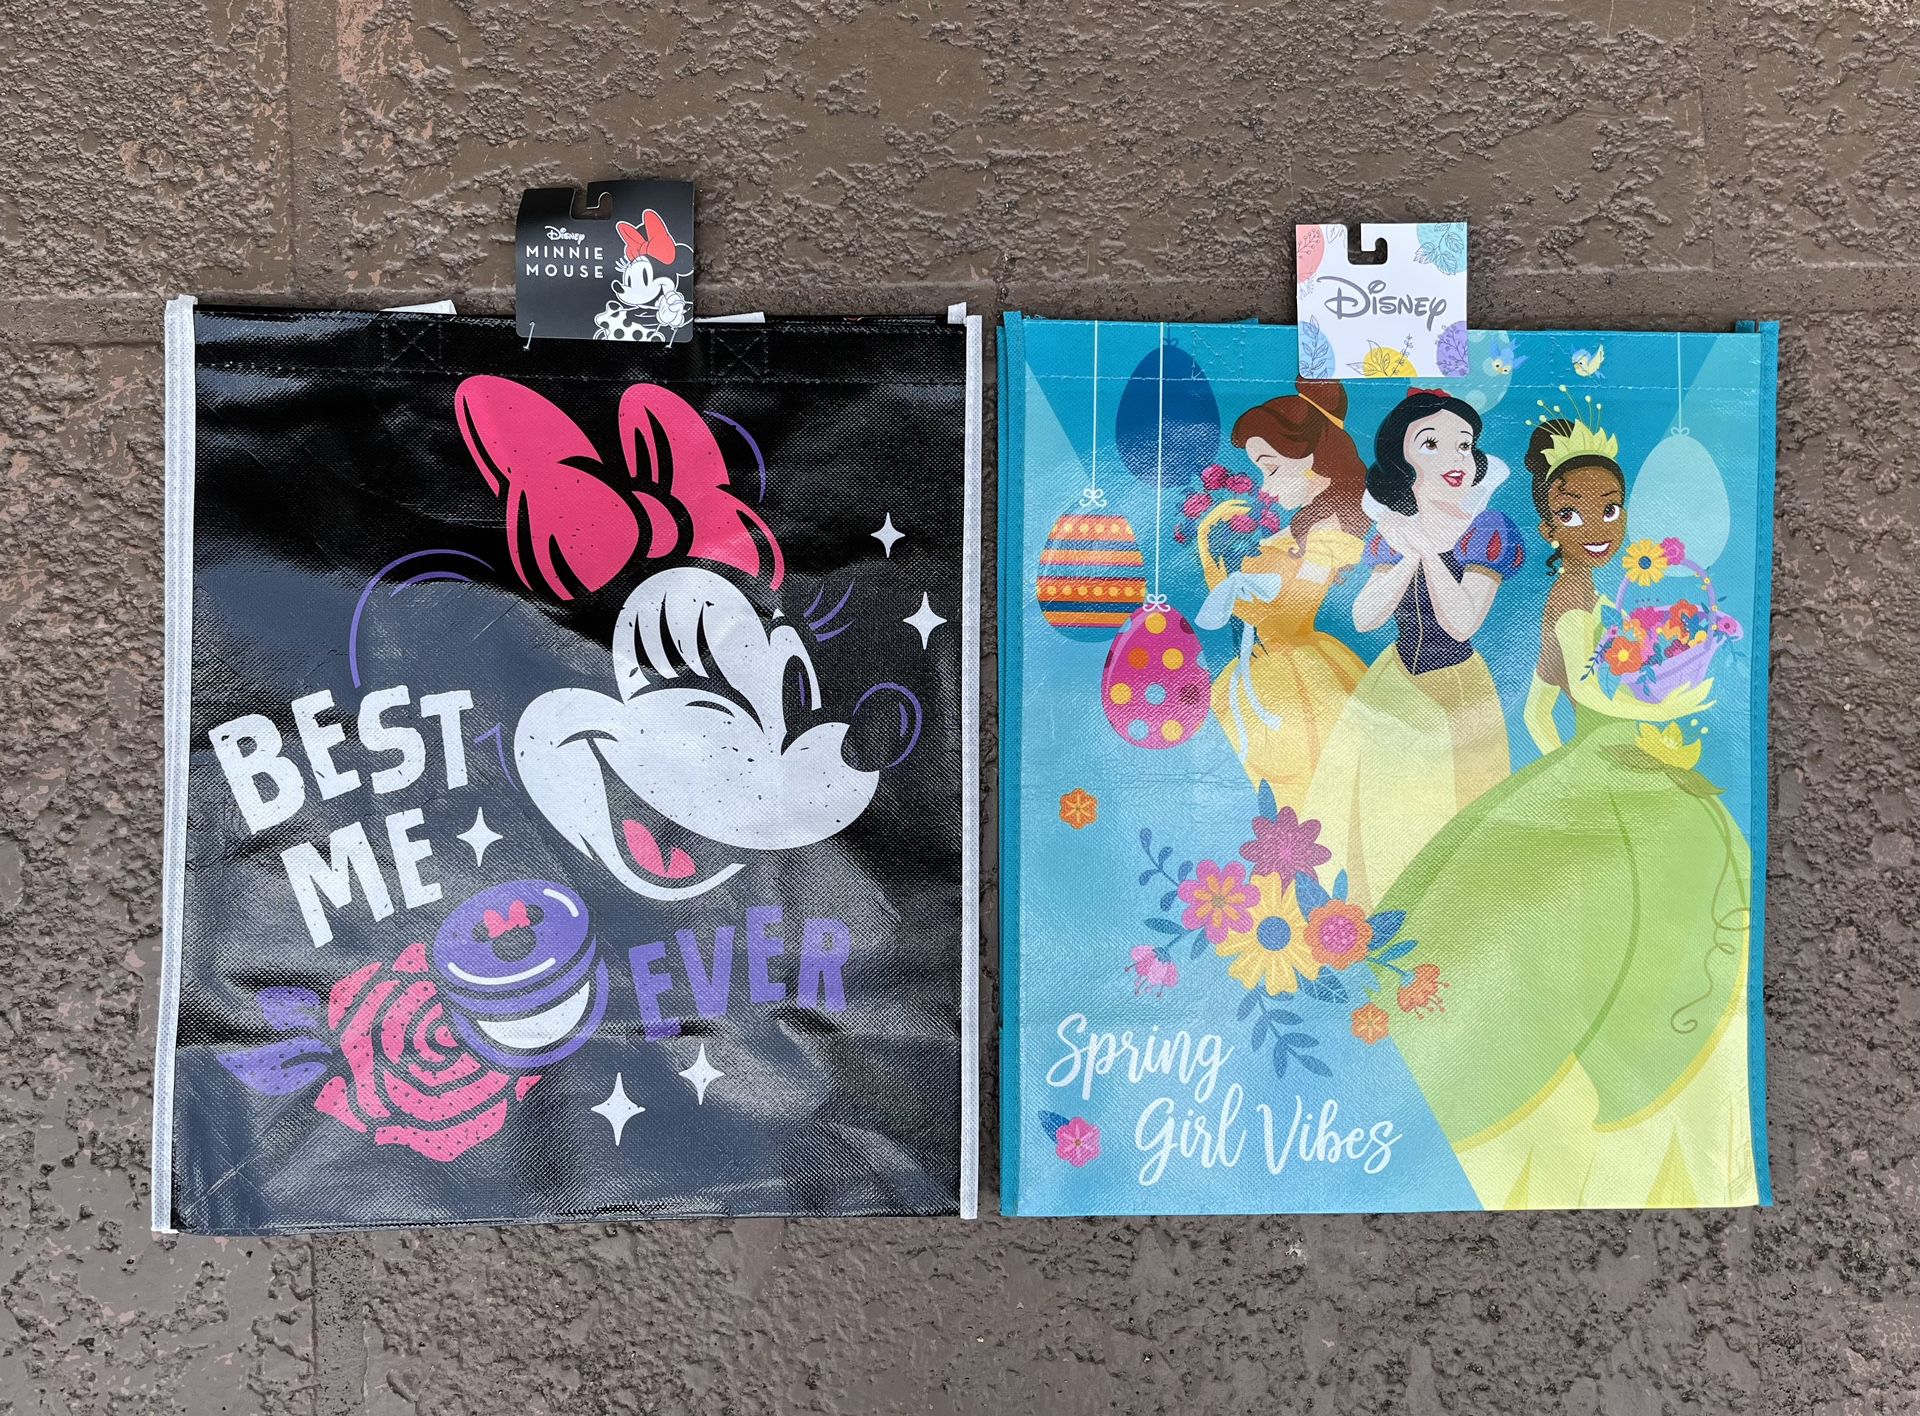 2 Brand new Disney Princess and Minnie Mouse reusable bags